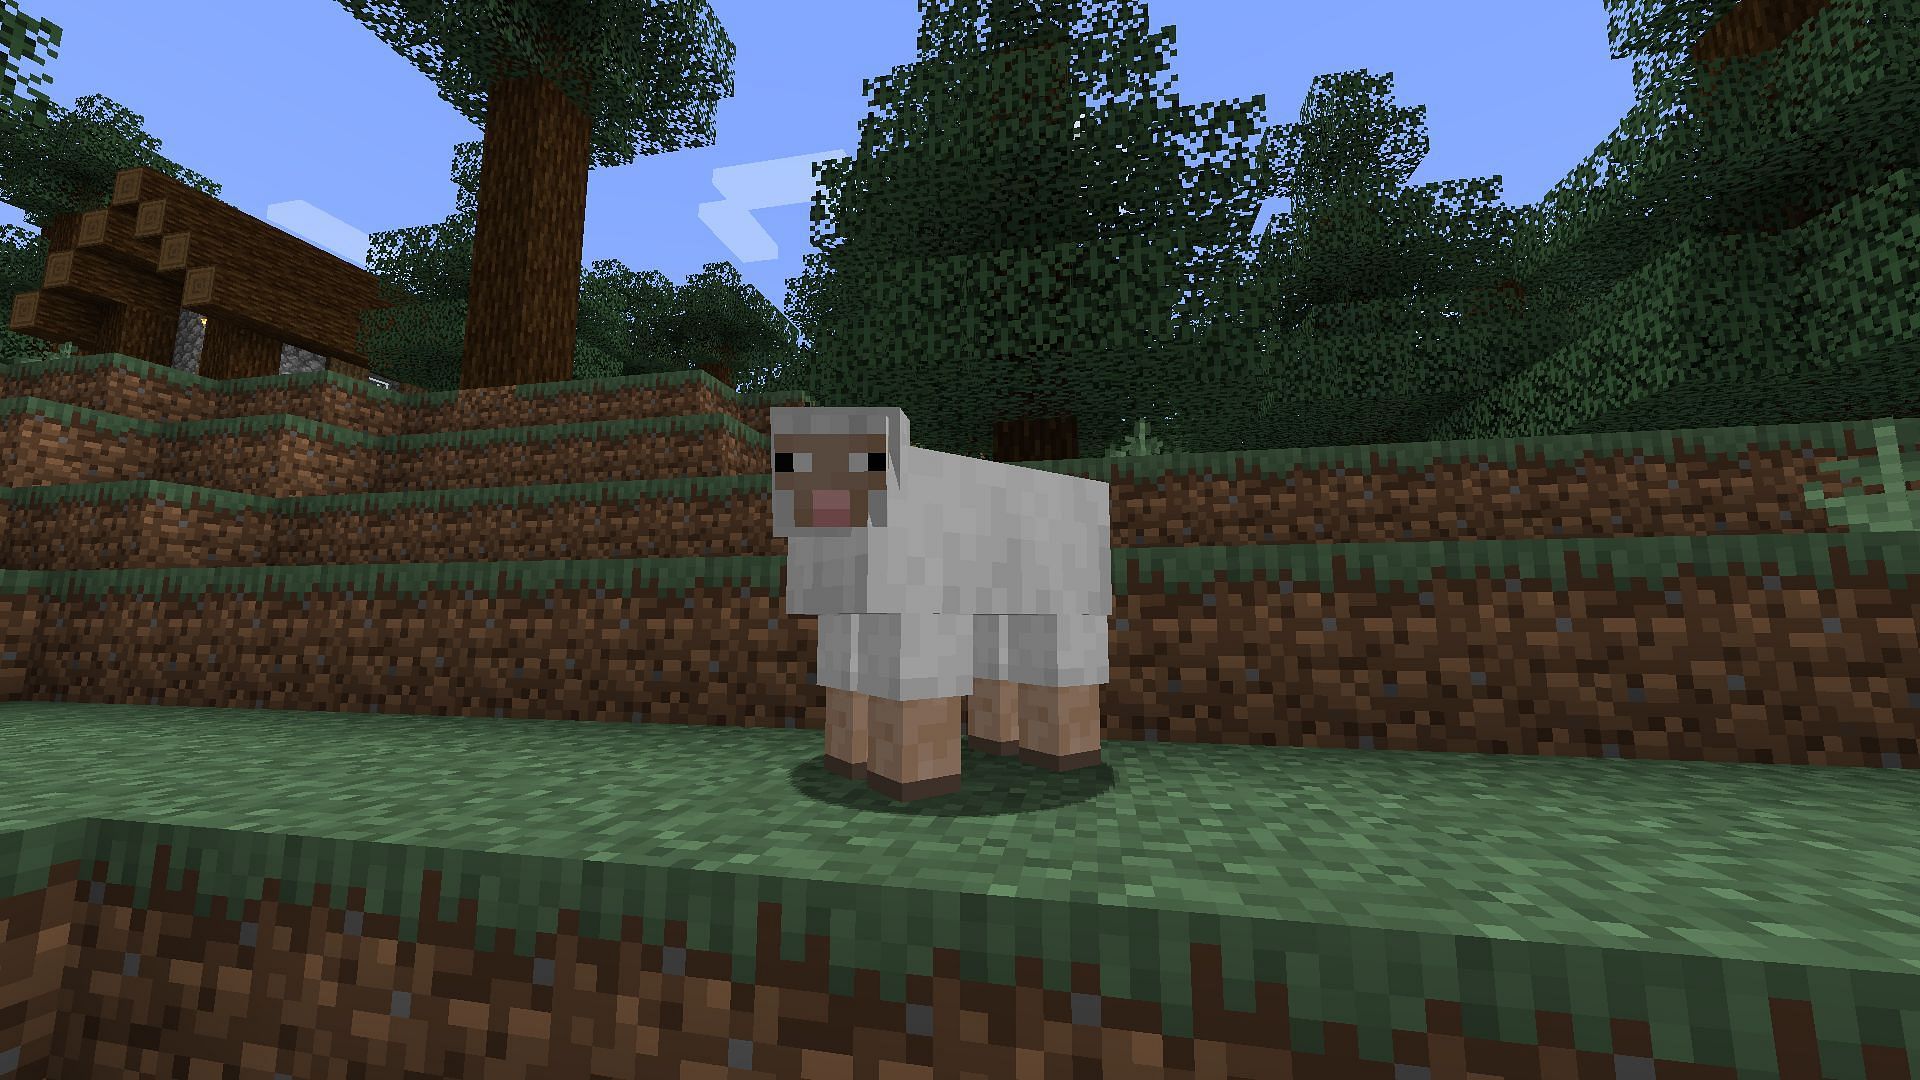 Sheep drop wool and raw mutton, both items are quite important for surviving in Minecraft (Image via Mojang)